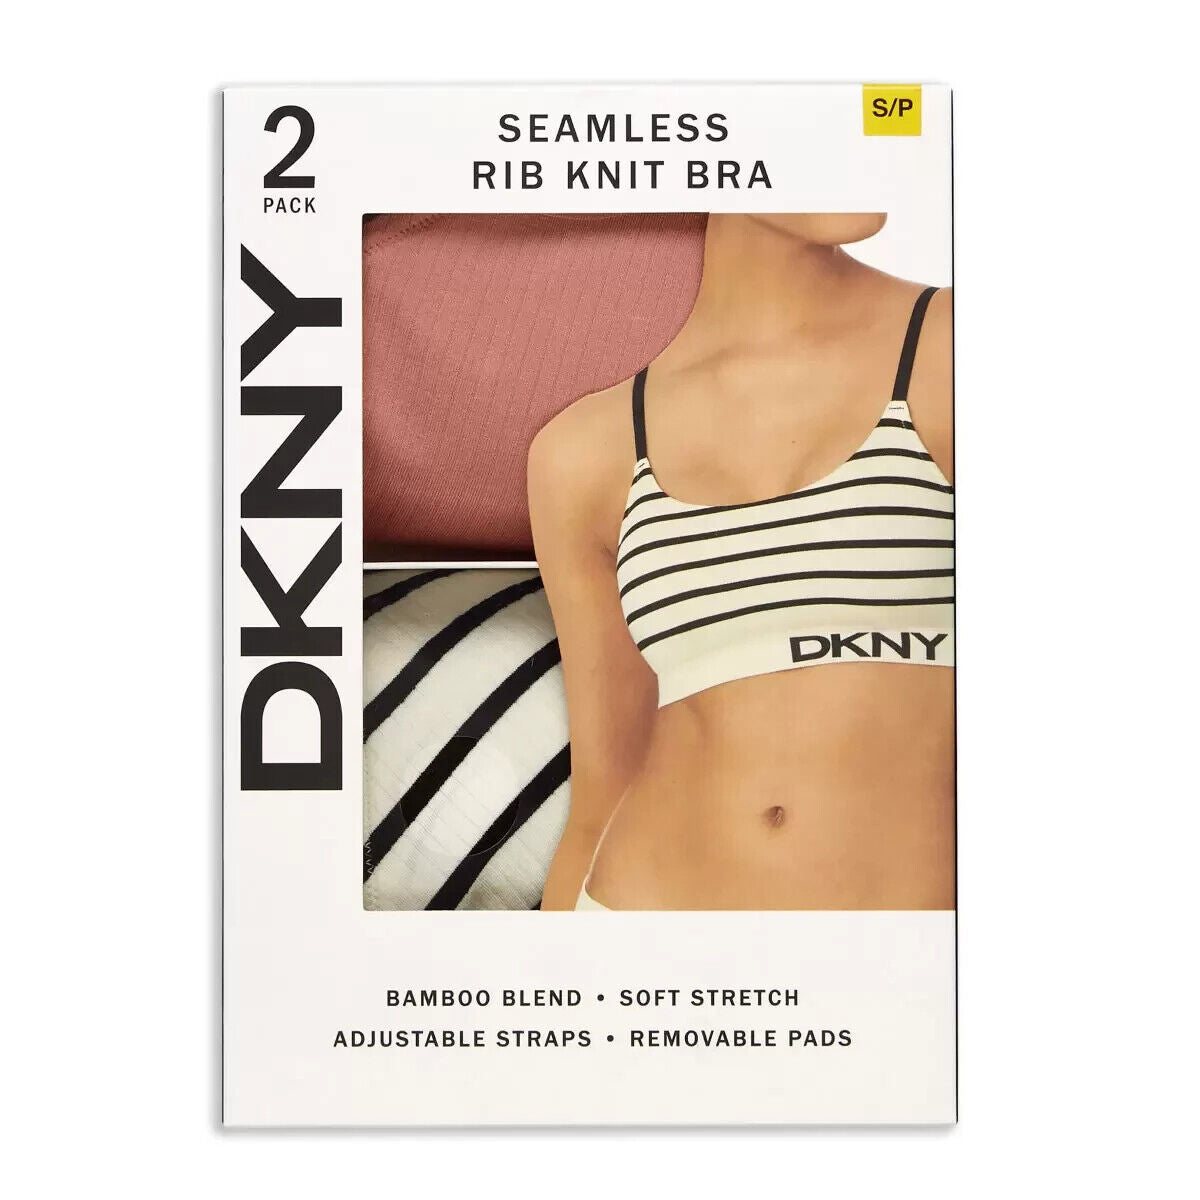 DKNY Women's Seamless Rib Knit 2 Pack Bralette in Pink/Nude, Small